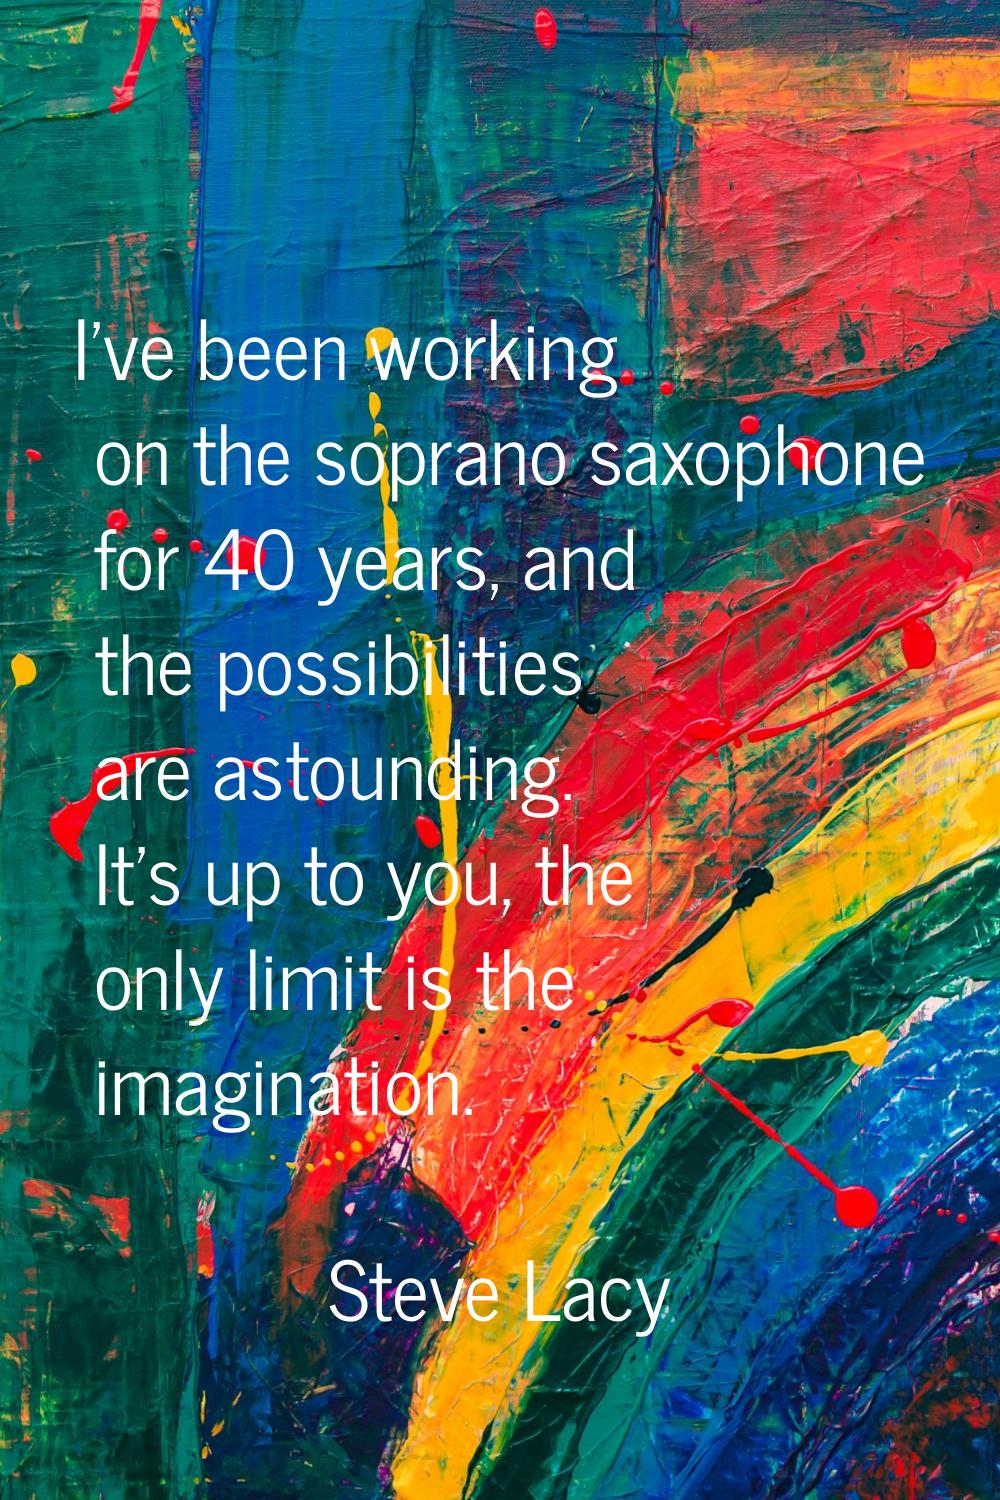 I've been working on the soprano saxophone for 40 years, and the possibilities are astounding. It's